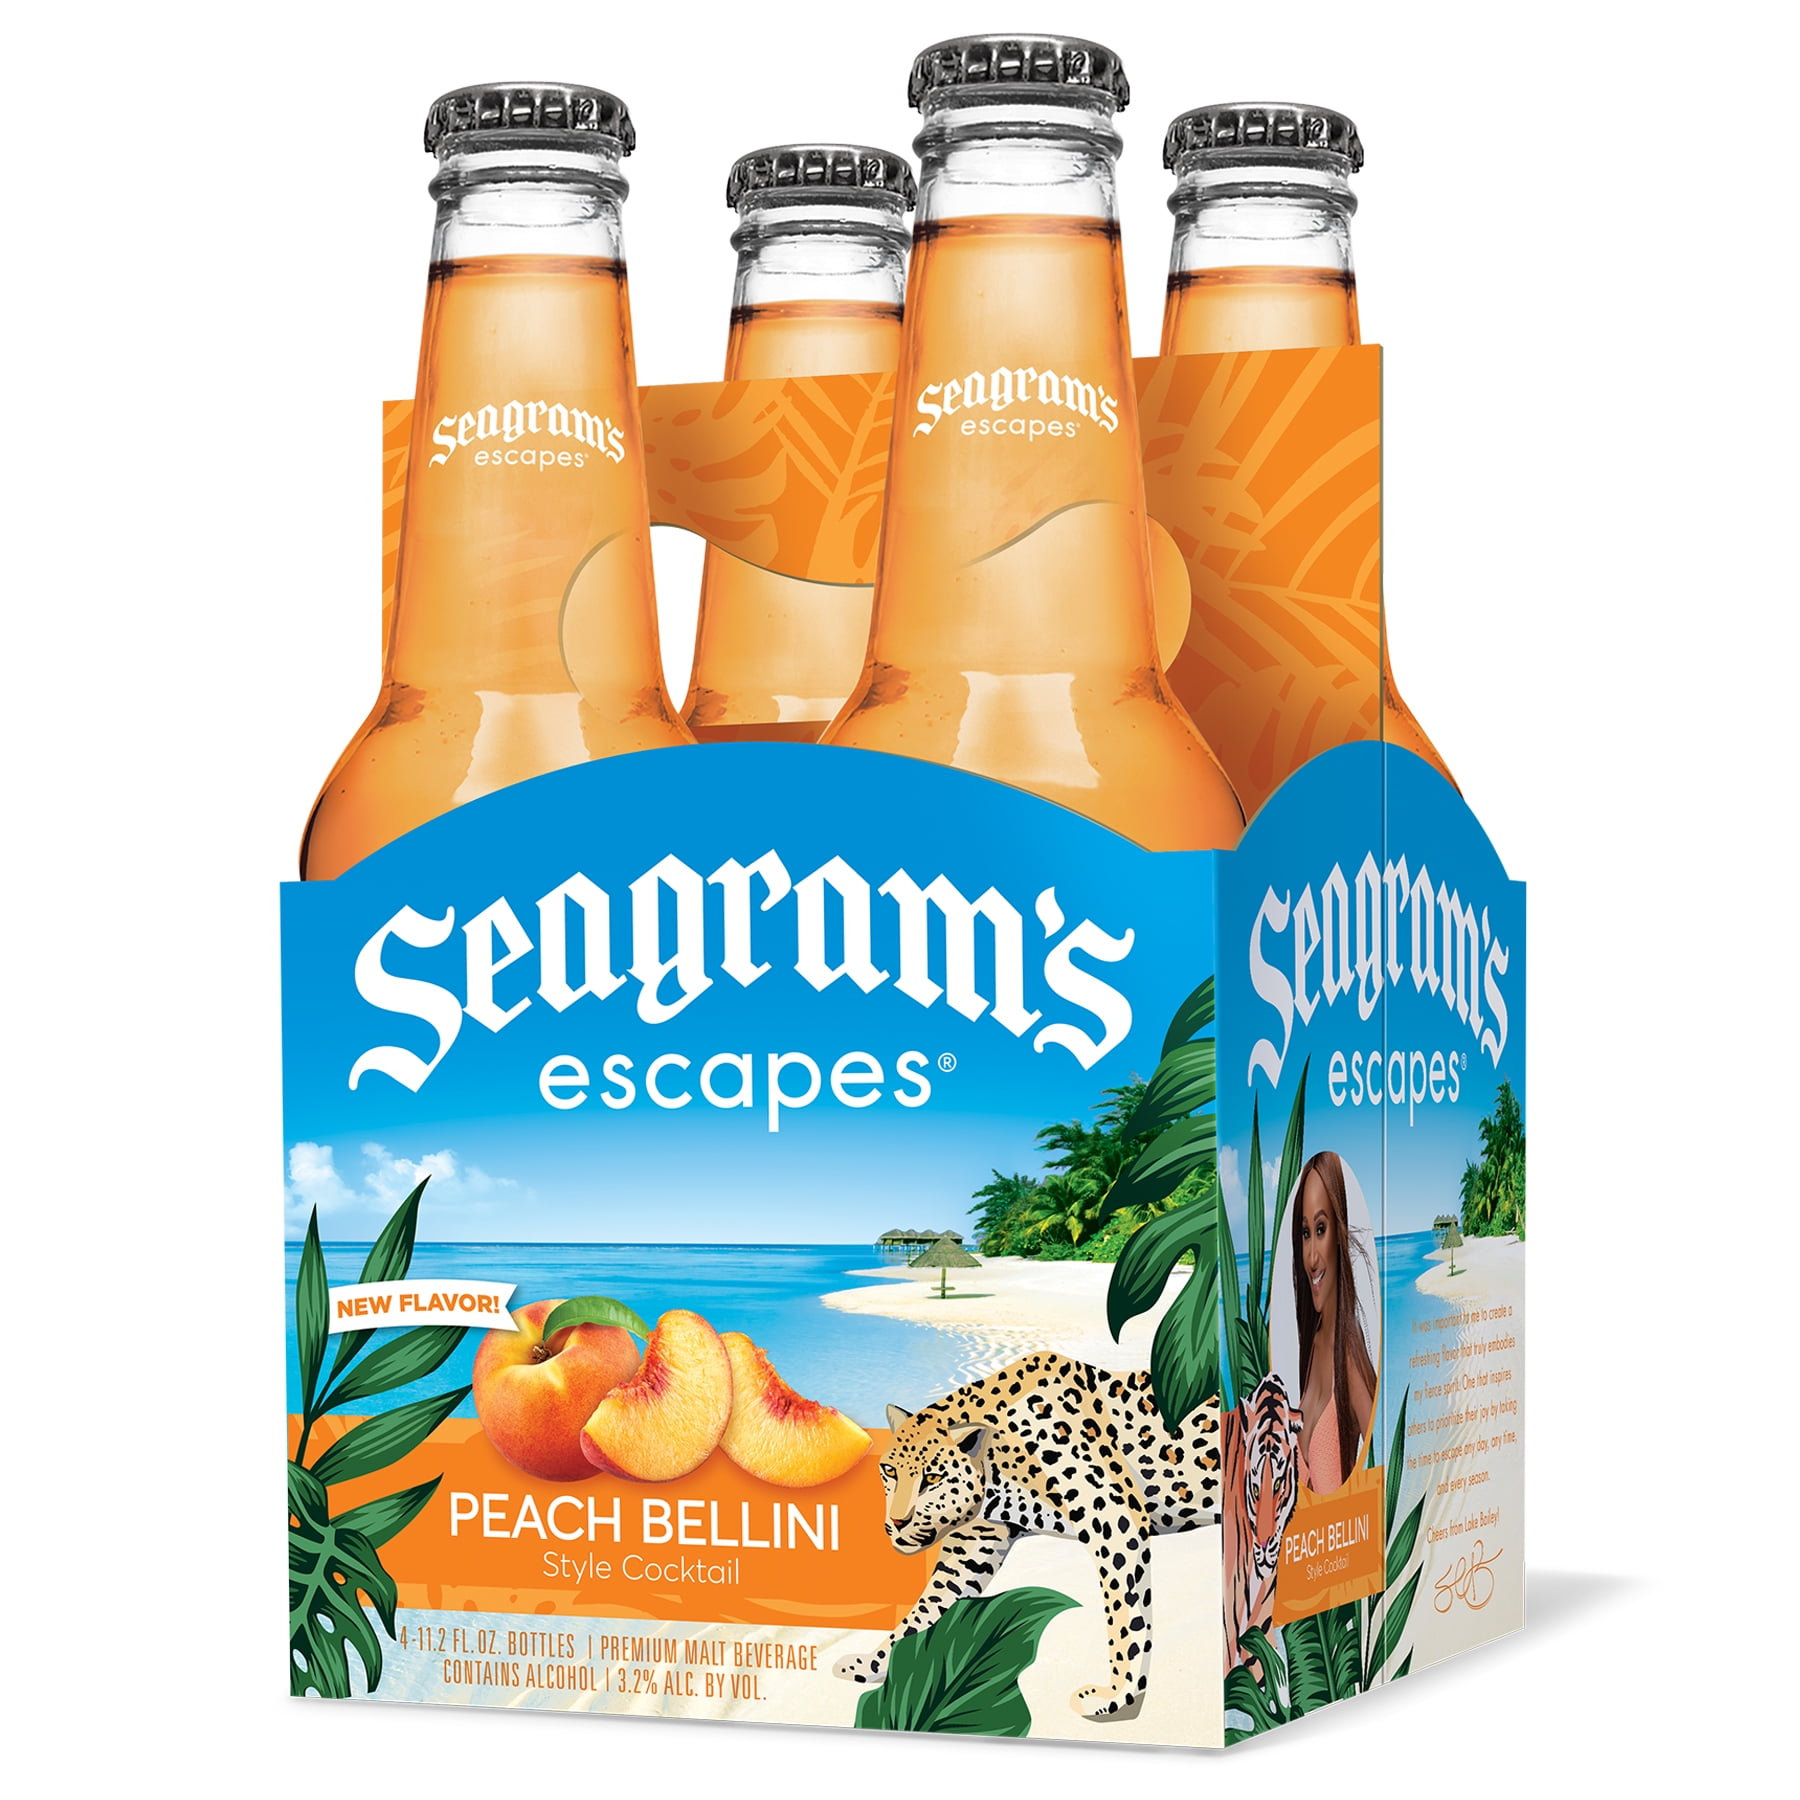 Seagrams Escapes Peach Fuzzy Navel Cocktail 4 Pack 112 Fl Oz.